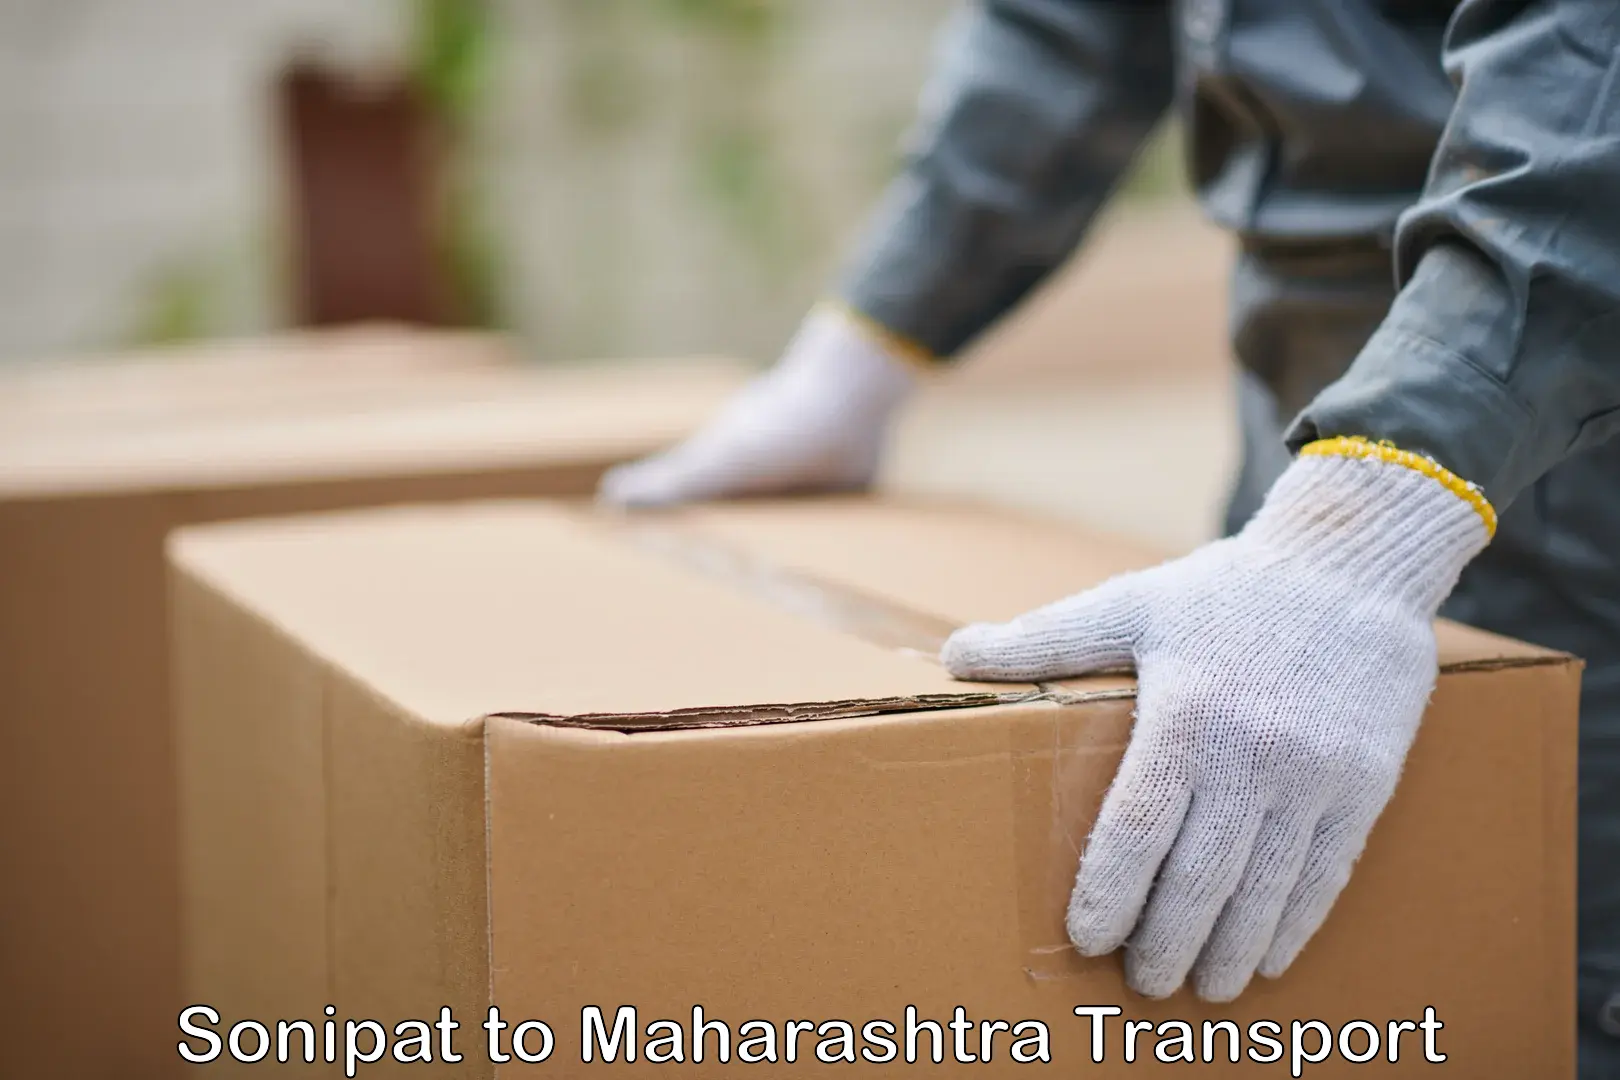 Container transport service Sonipat to Nashik